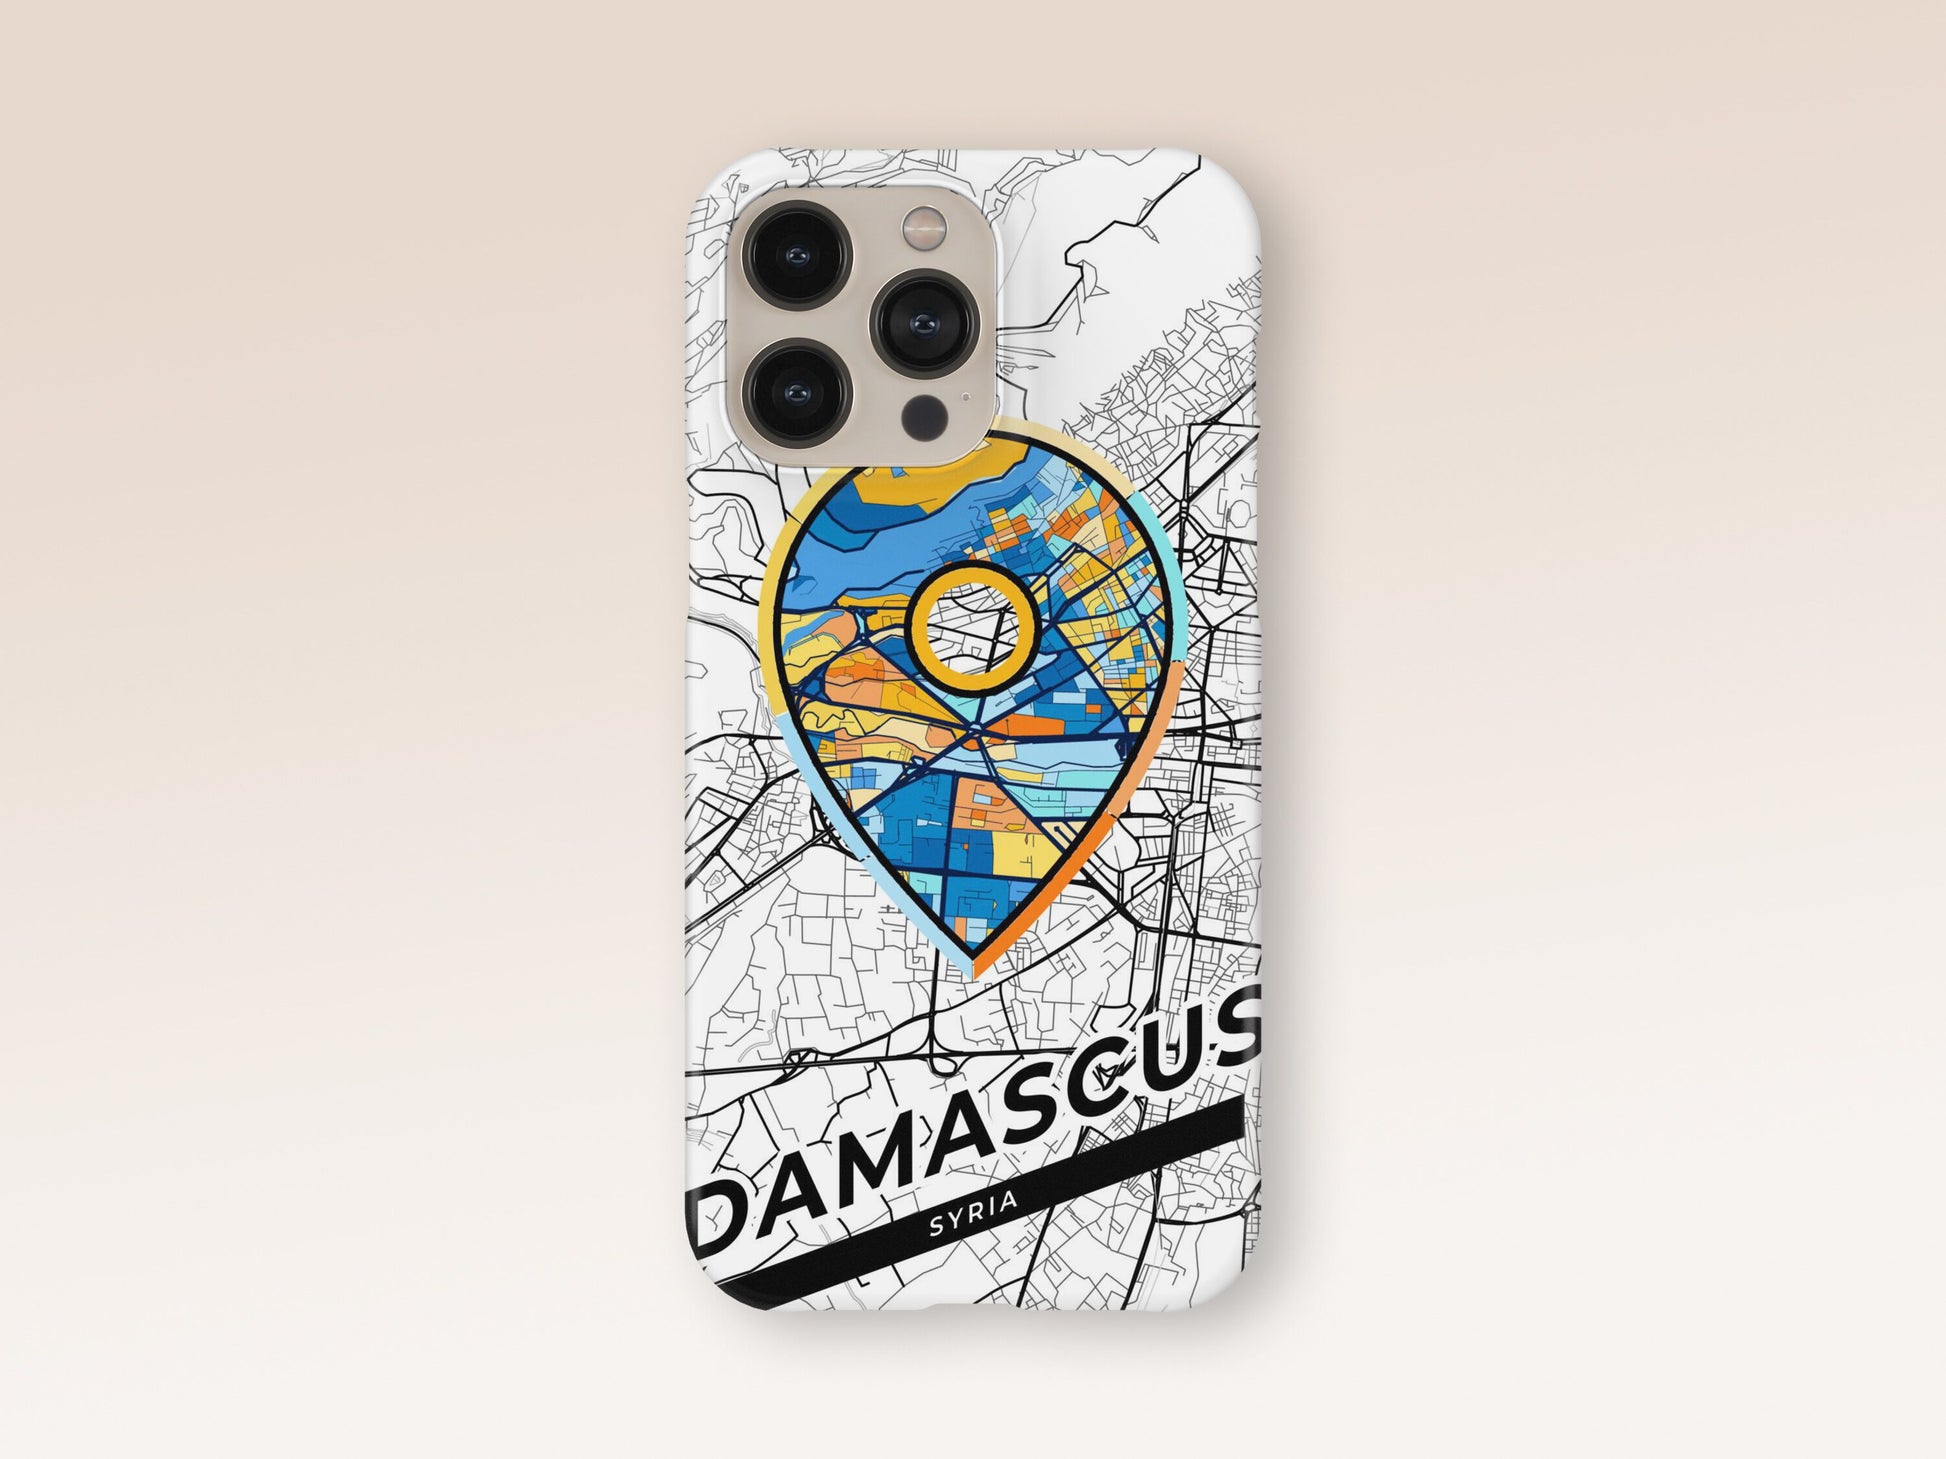 Damascus Syria slim phone case with colorful icon. Birthday, wedding or housewarming gift. Couple match cases. 1